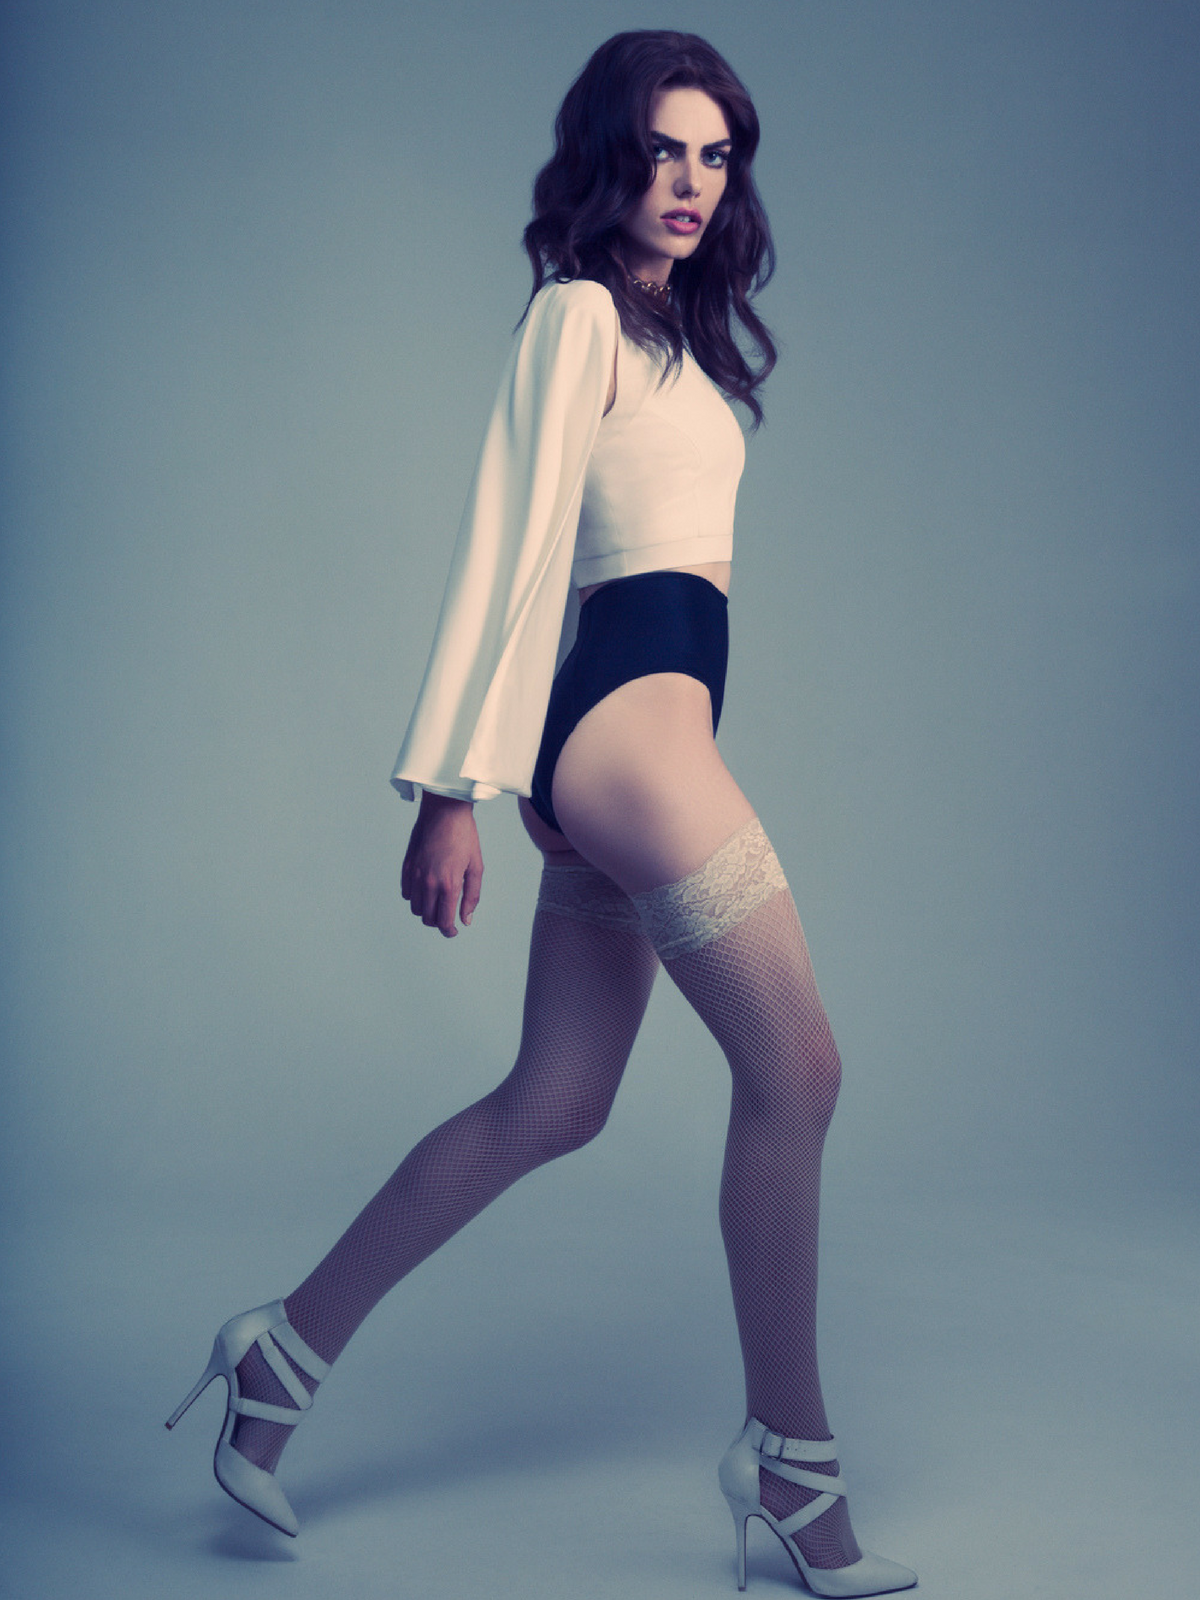 model wearing white long sleeved top and black shorts with white fishnet thigh highs